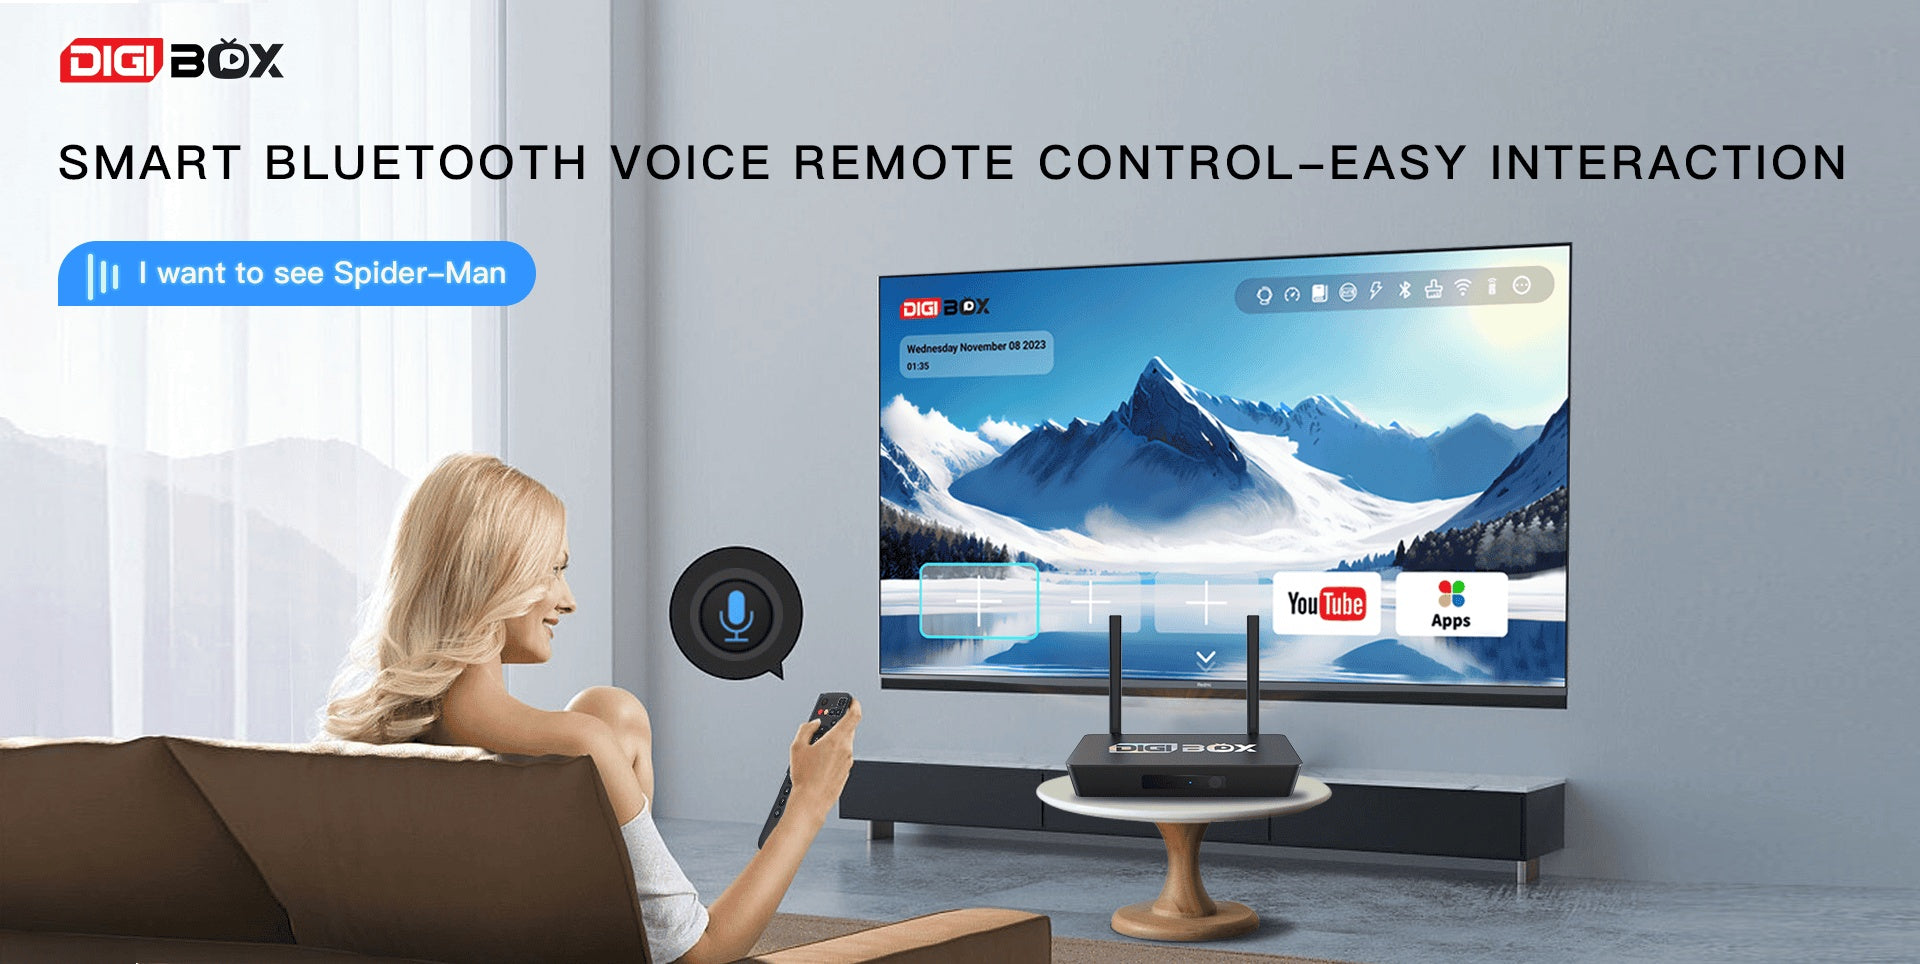 Experience Spider-Man on DIGIBOX with smart voice remote, a relaxing couch session.